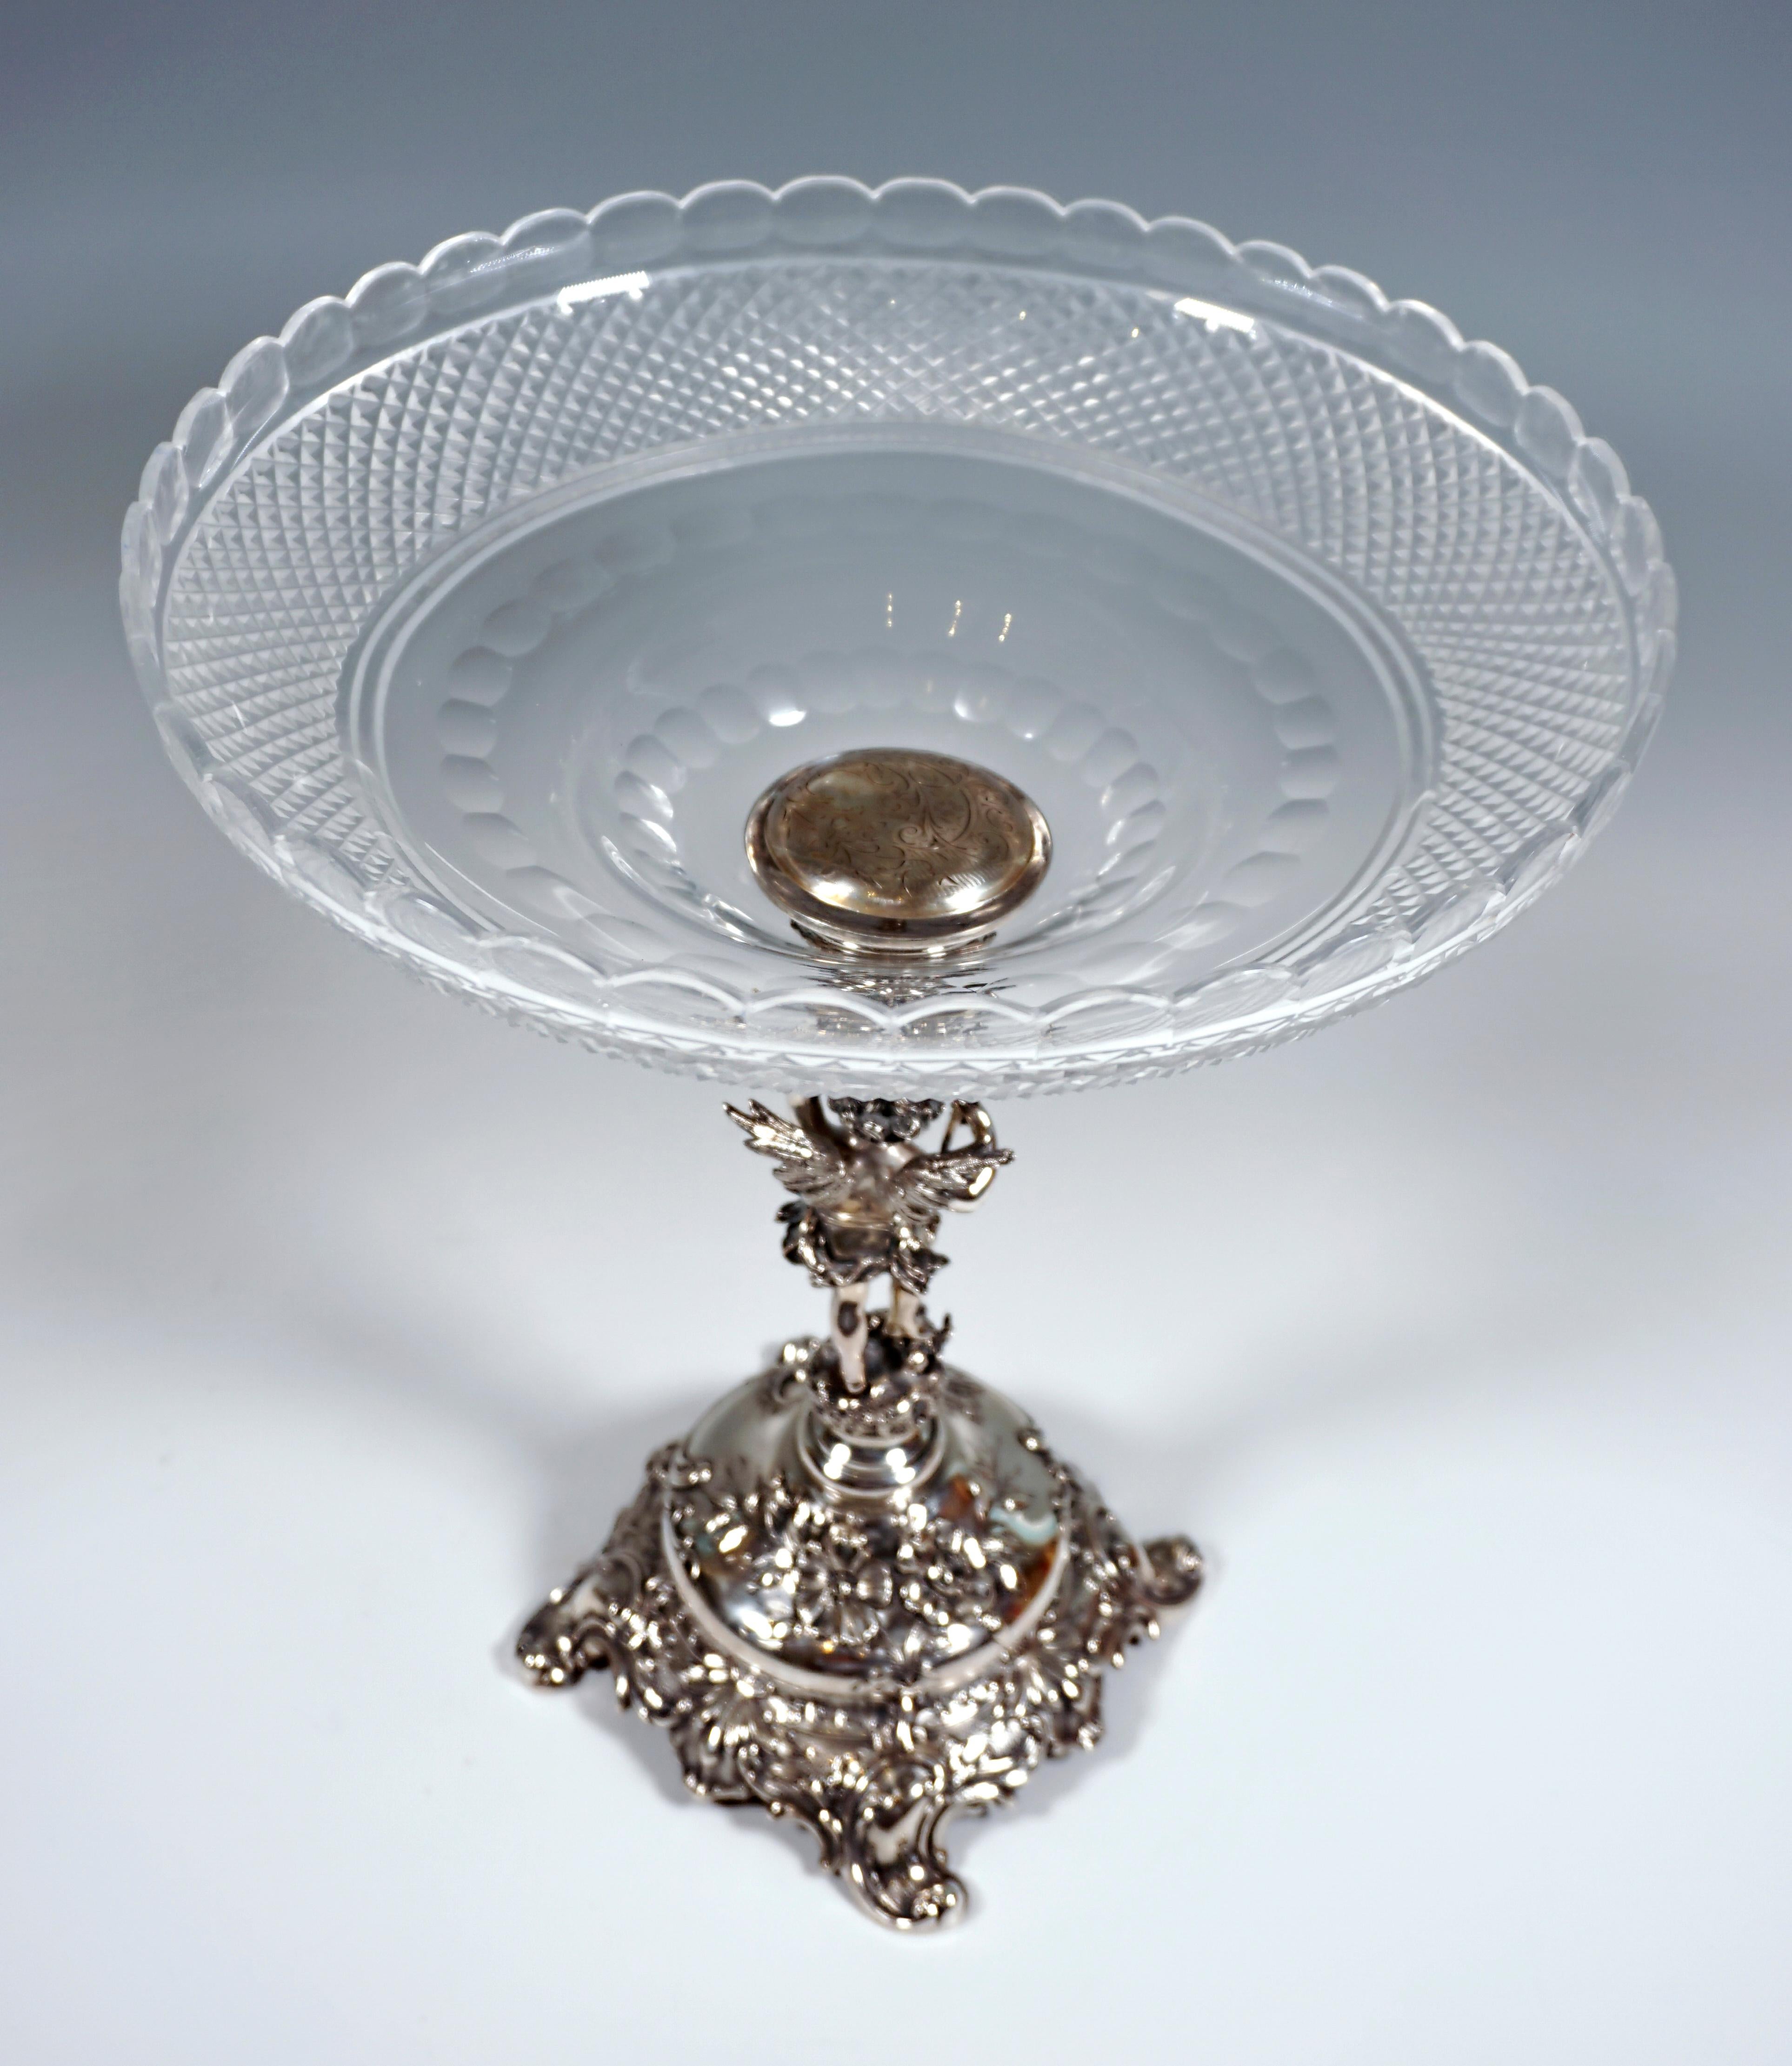 English Art Nouveau Vienna Silver Centerpiece with Cupid as a Bowl Carrier, Around 1900